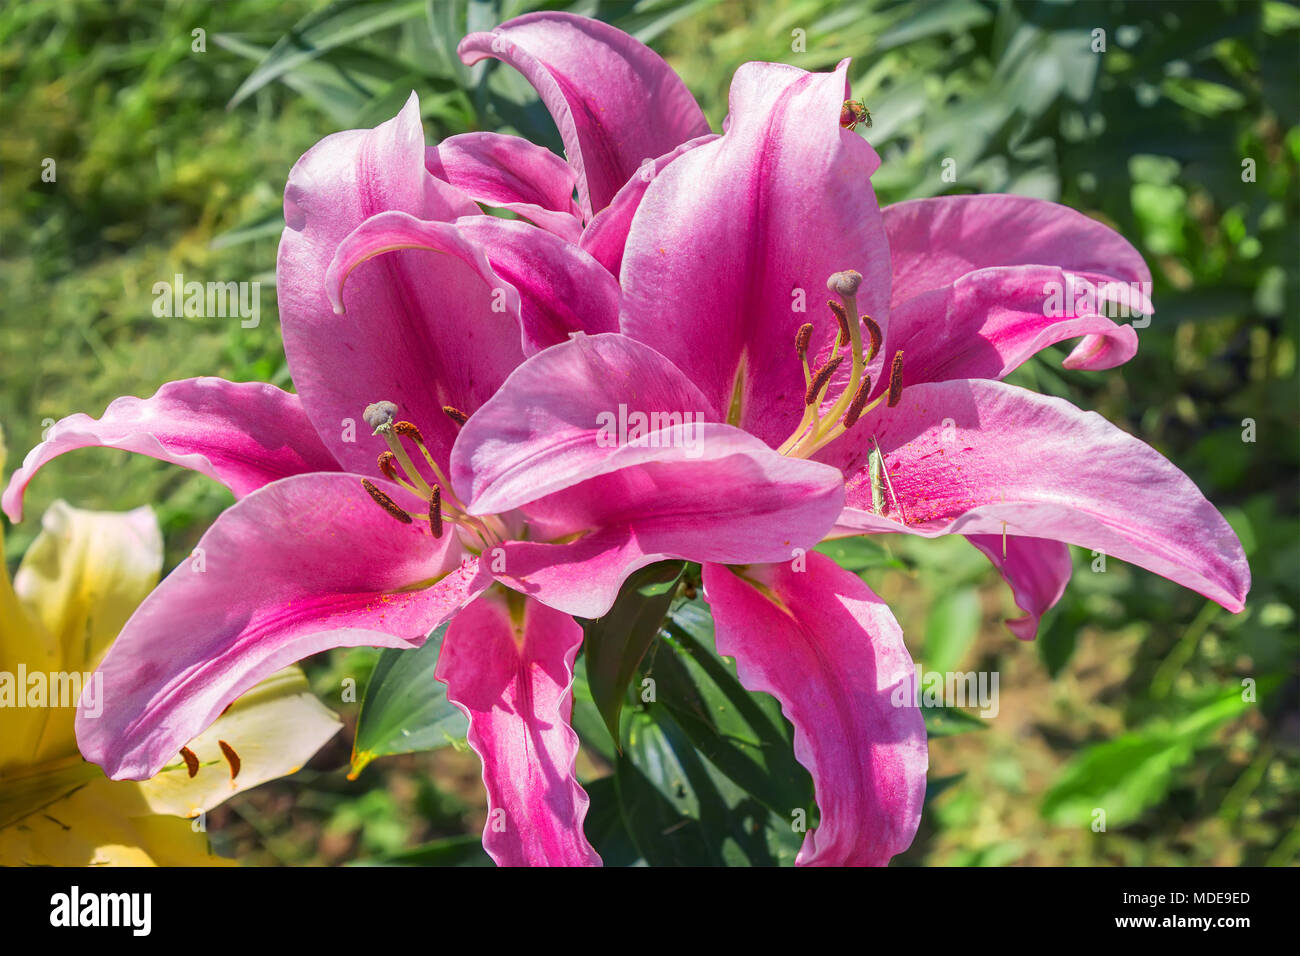 Flowering pink lilies in a garden. Stock Photo